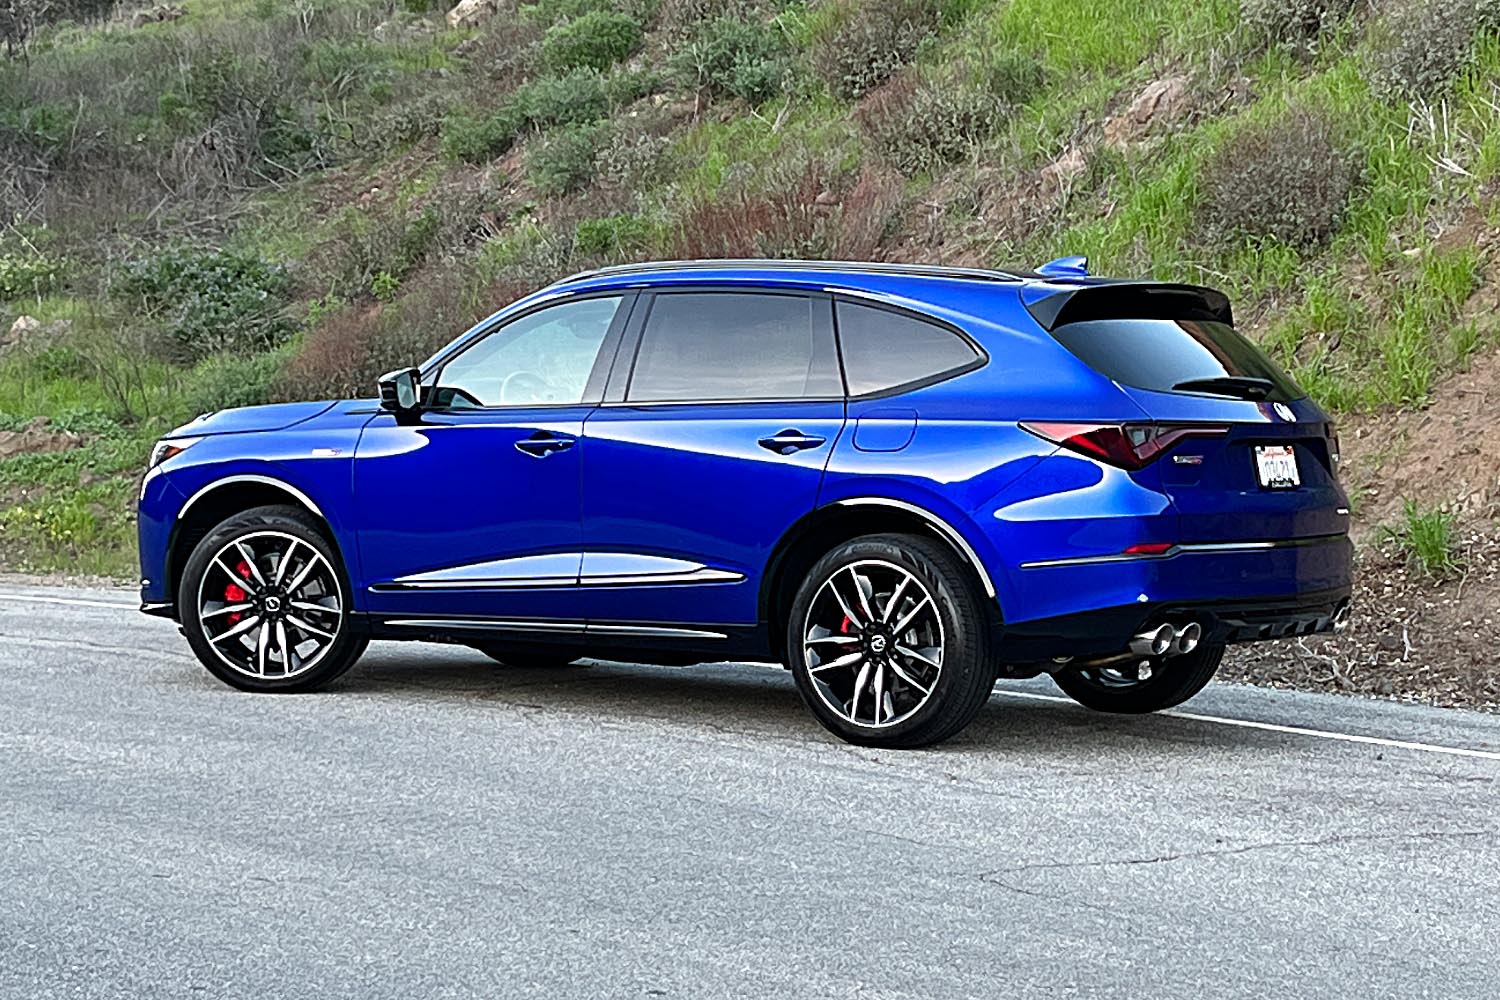 2023 Acura MDX Type S in Apex Blue Pearl, rear three-quarter view.